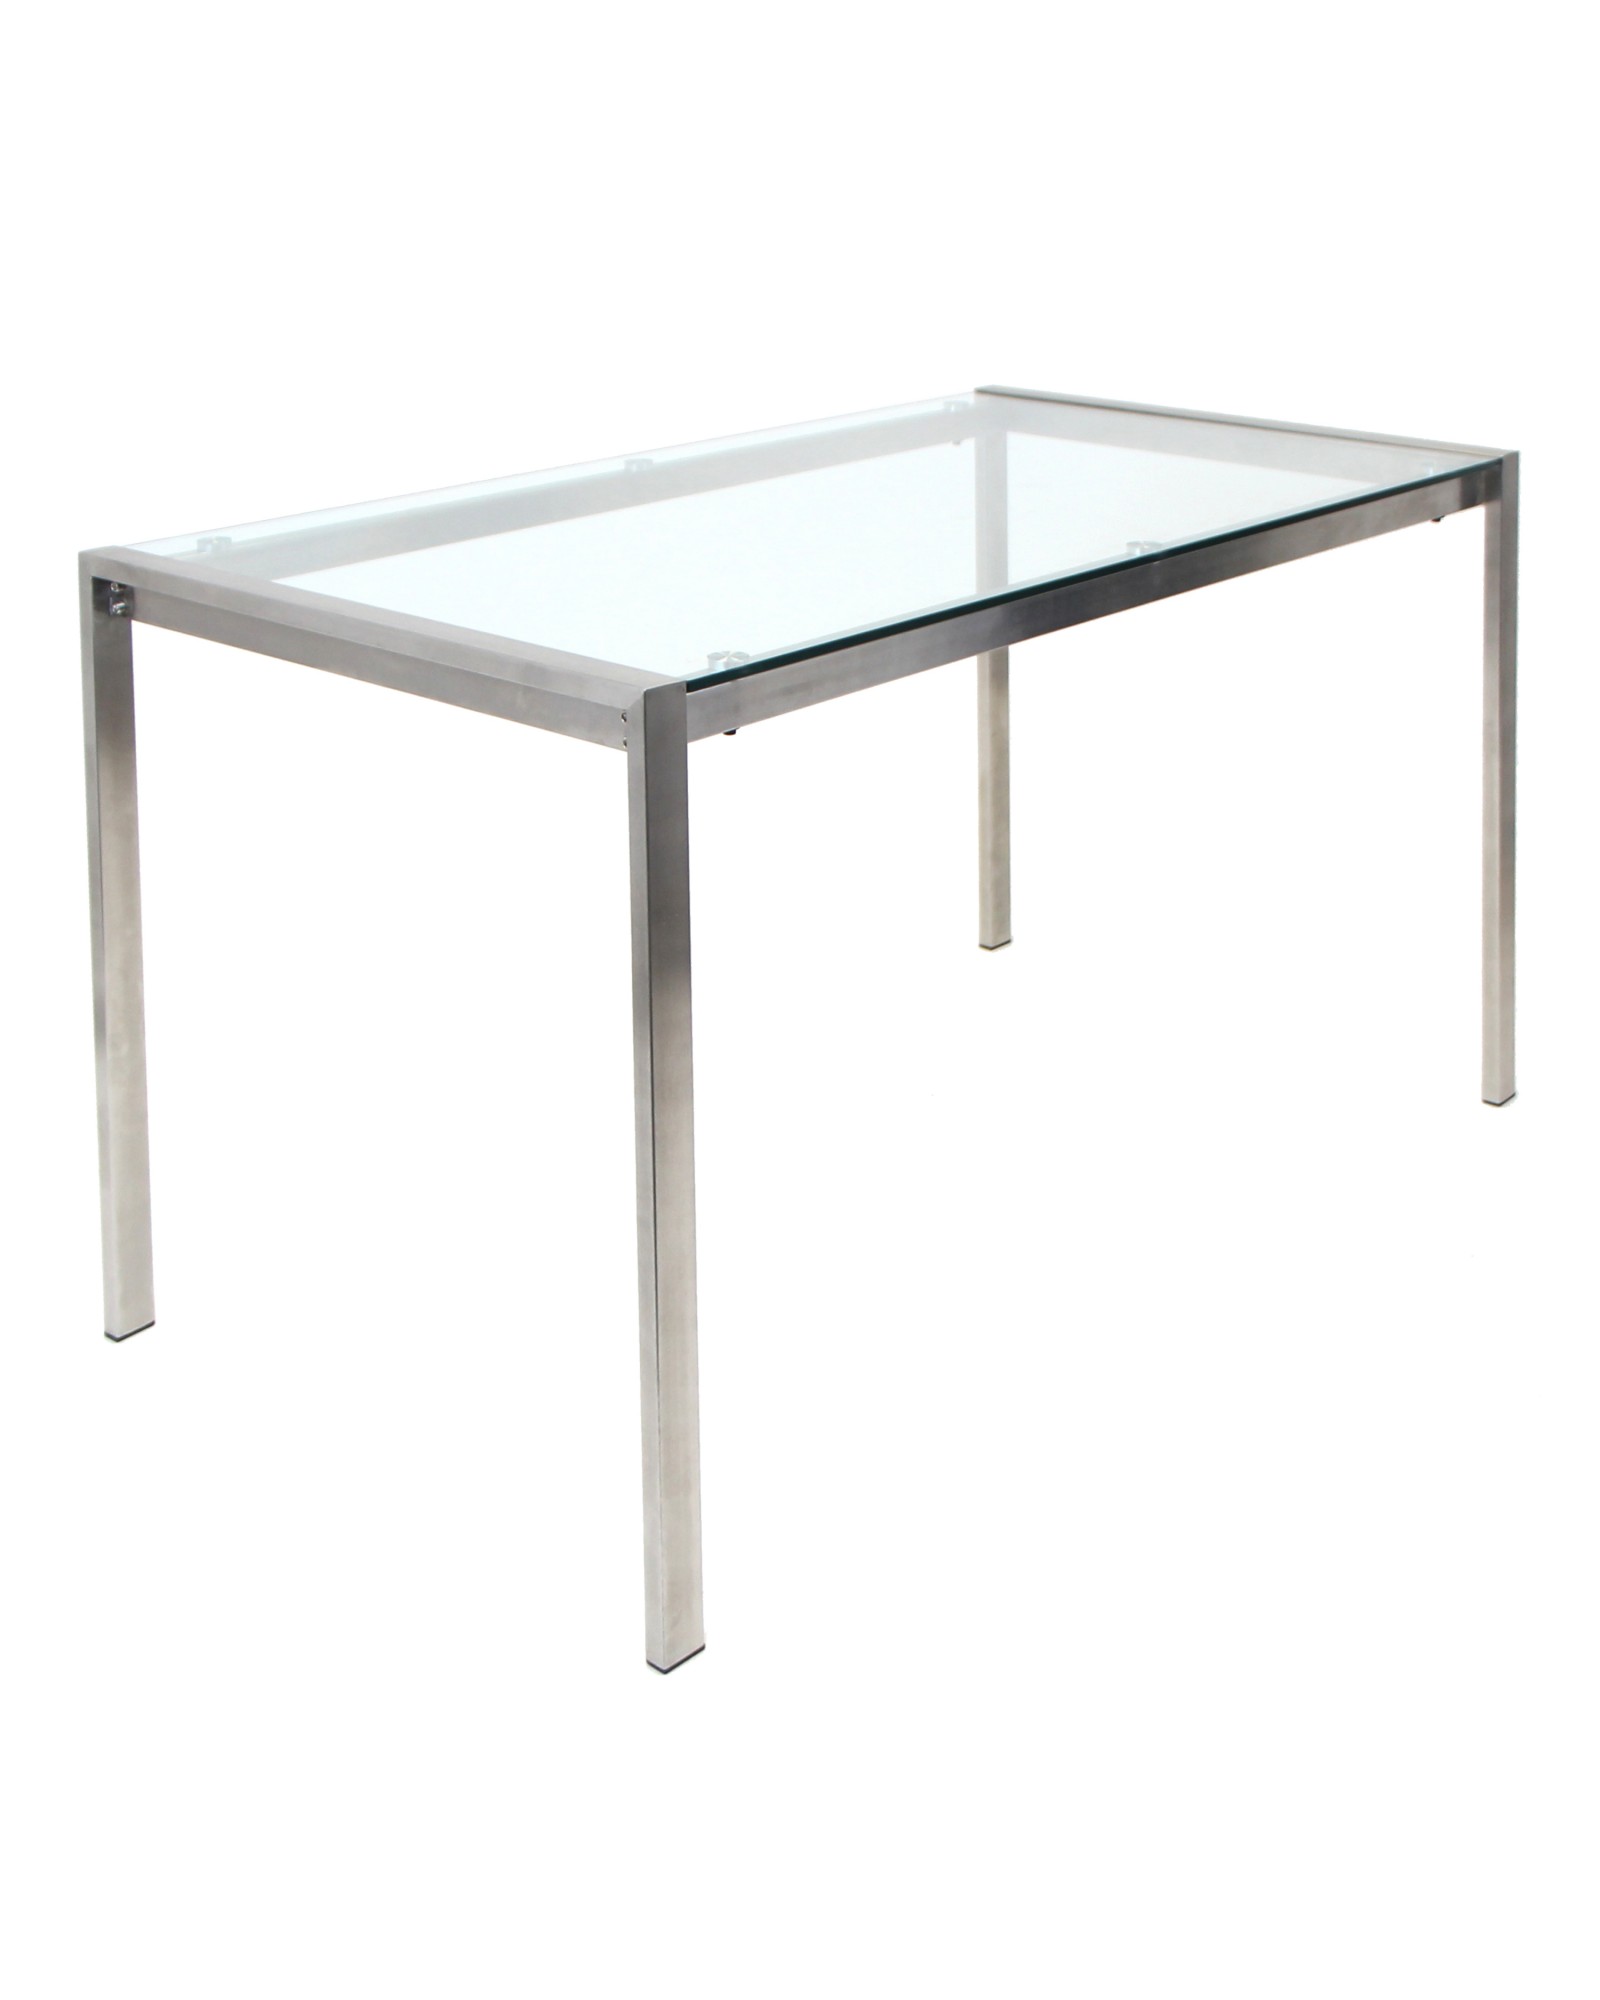 Fuji Dining Contemporary Table in Stainless Steel with Clear Glass Top